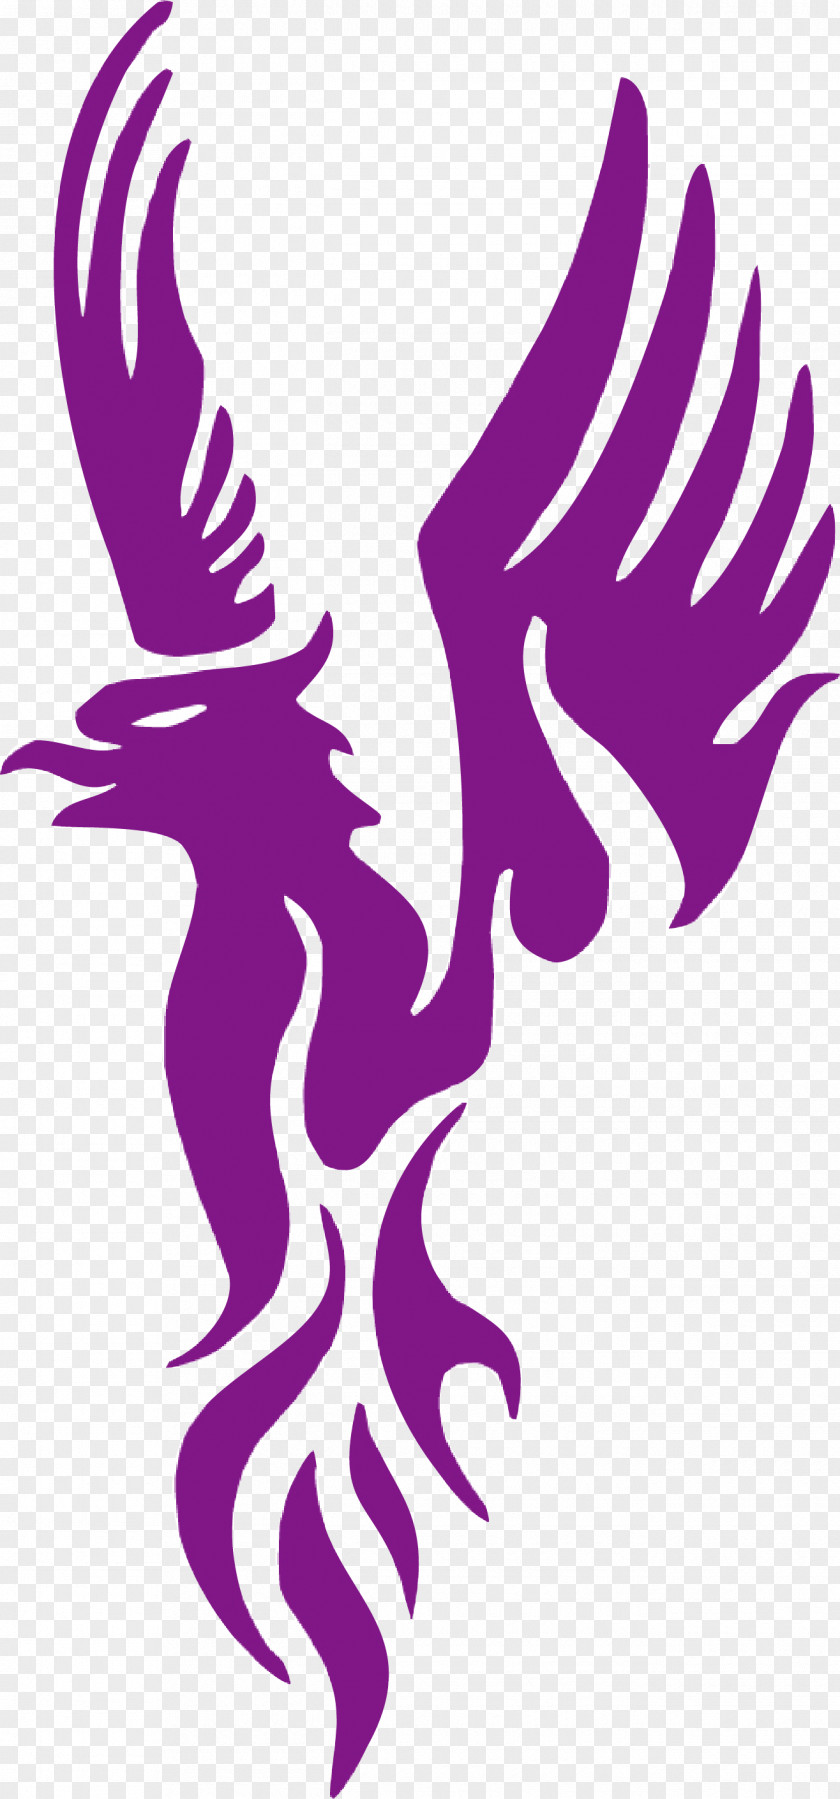 Phoenix Linda Abril Educational Academy Be A Leader Foundation Clip Art PNG